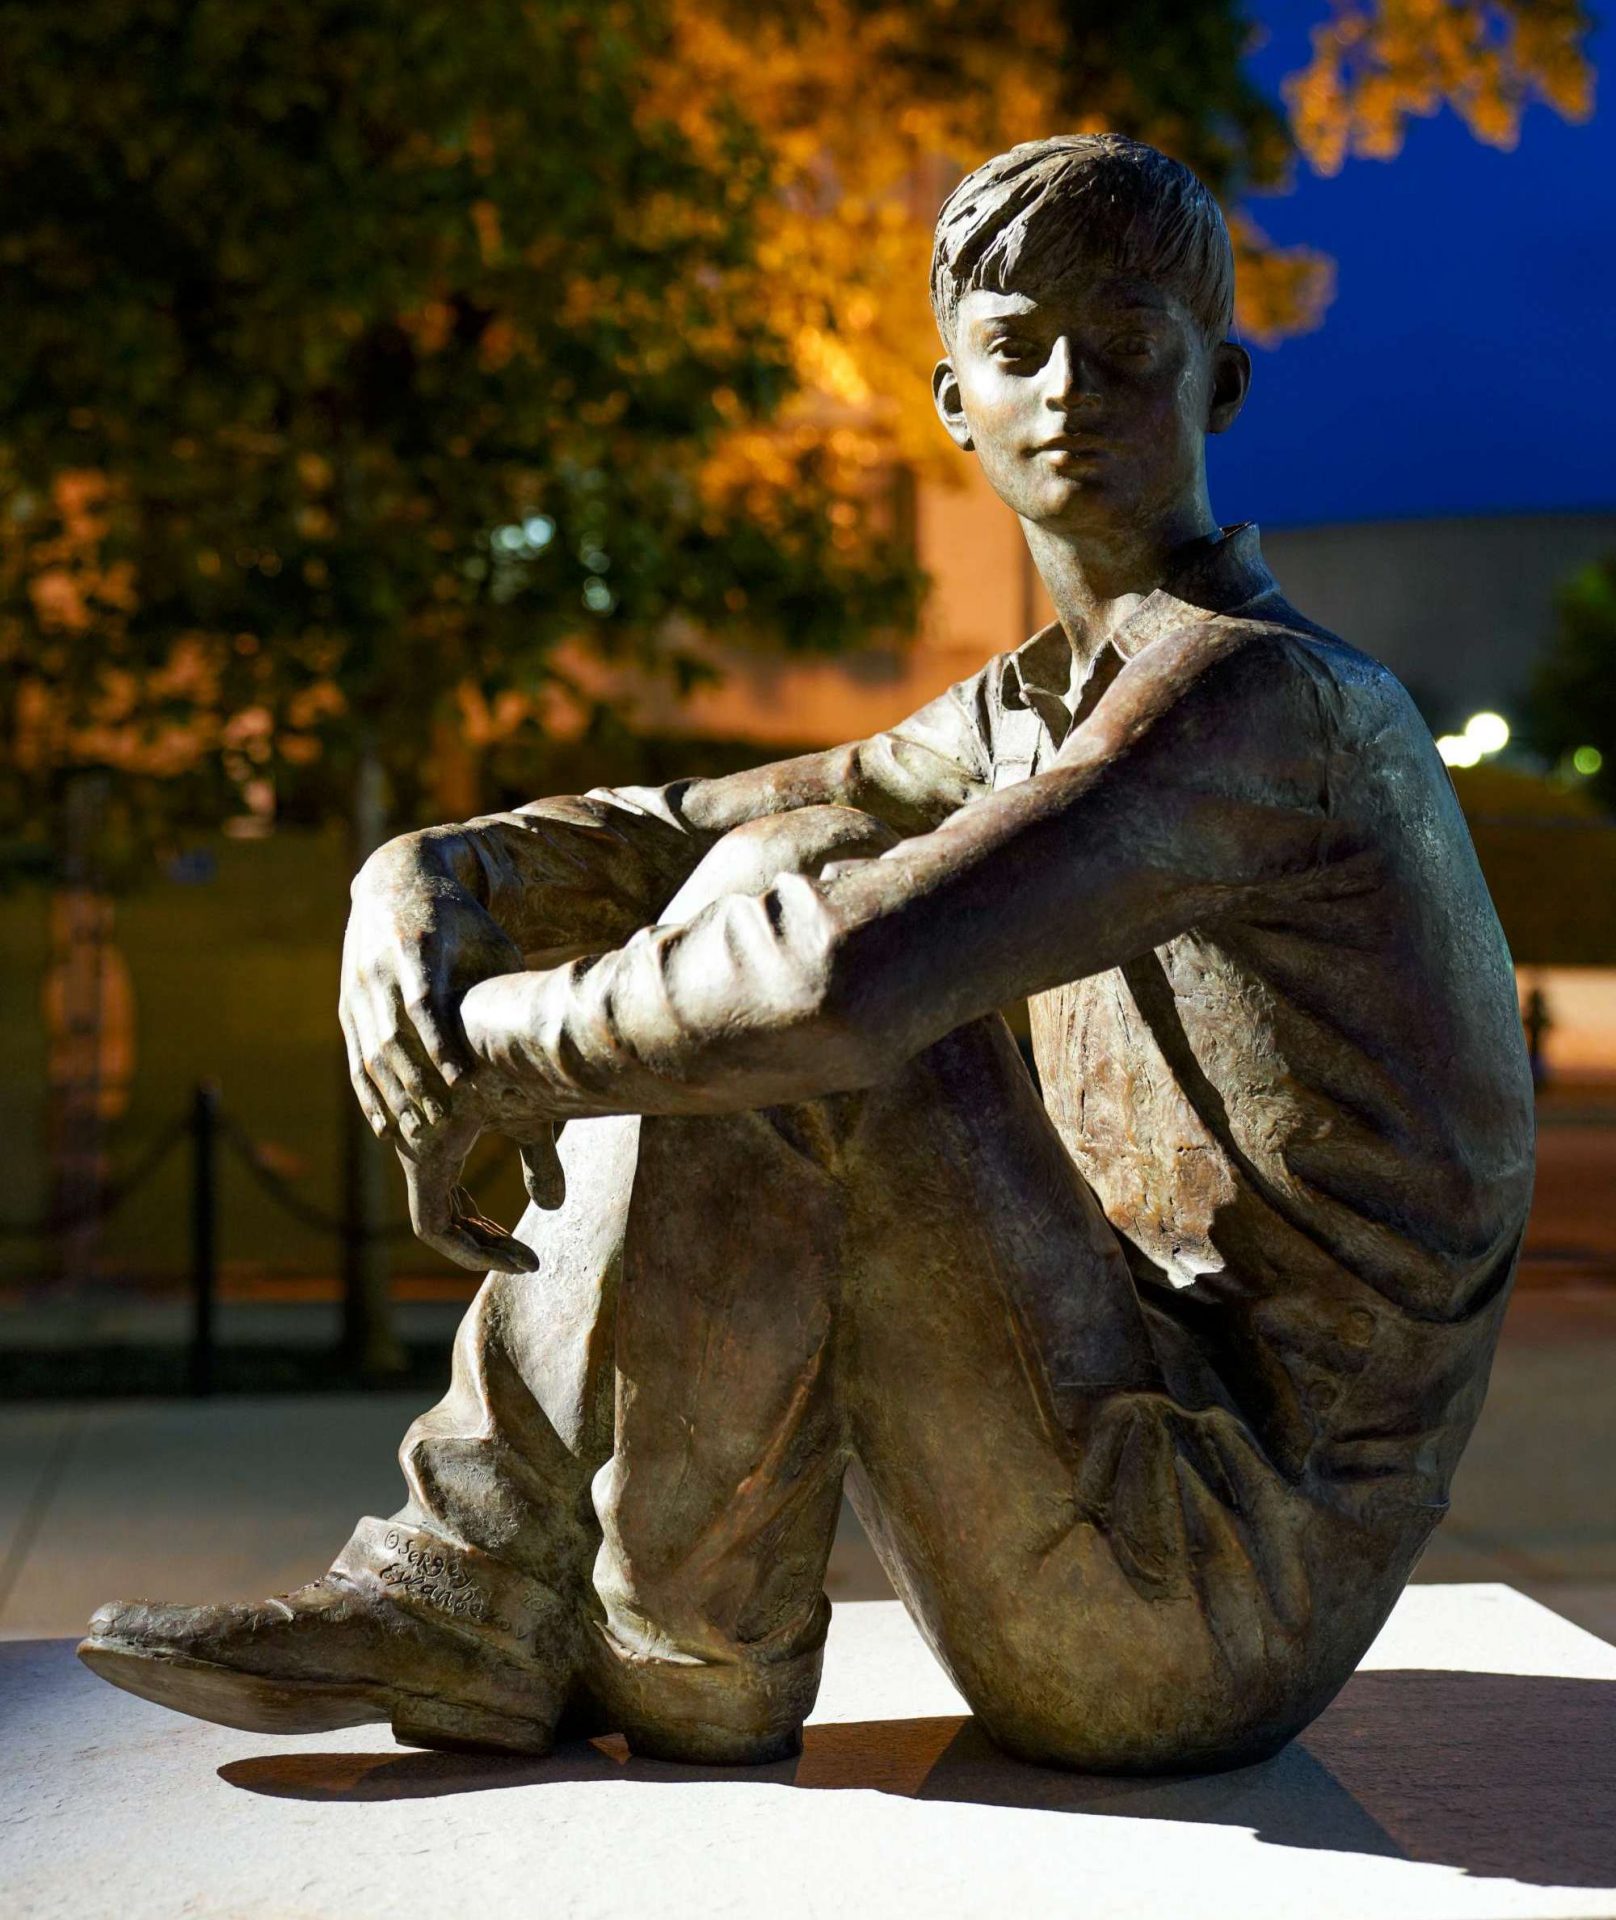 A life-size young Ike looks over at the statues depicting his future.